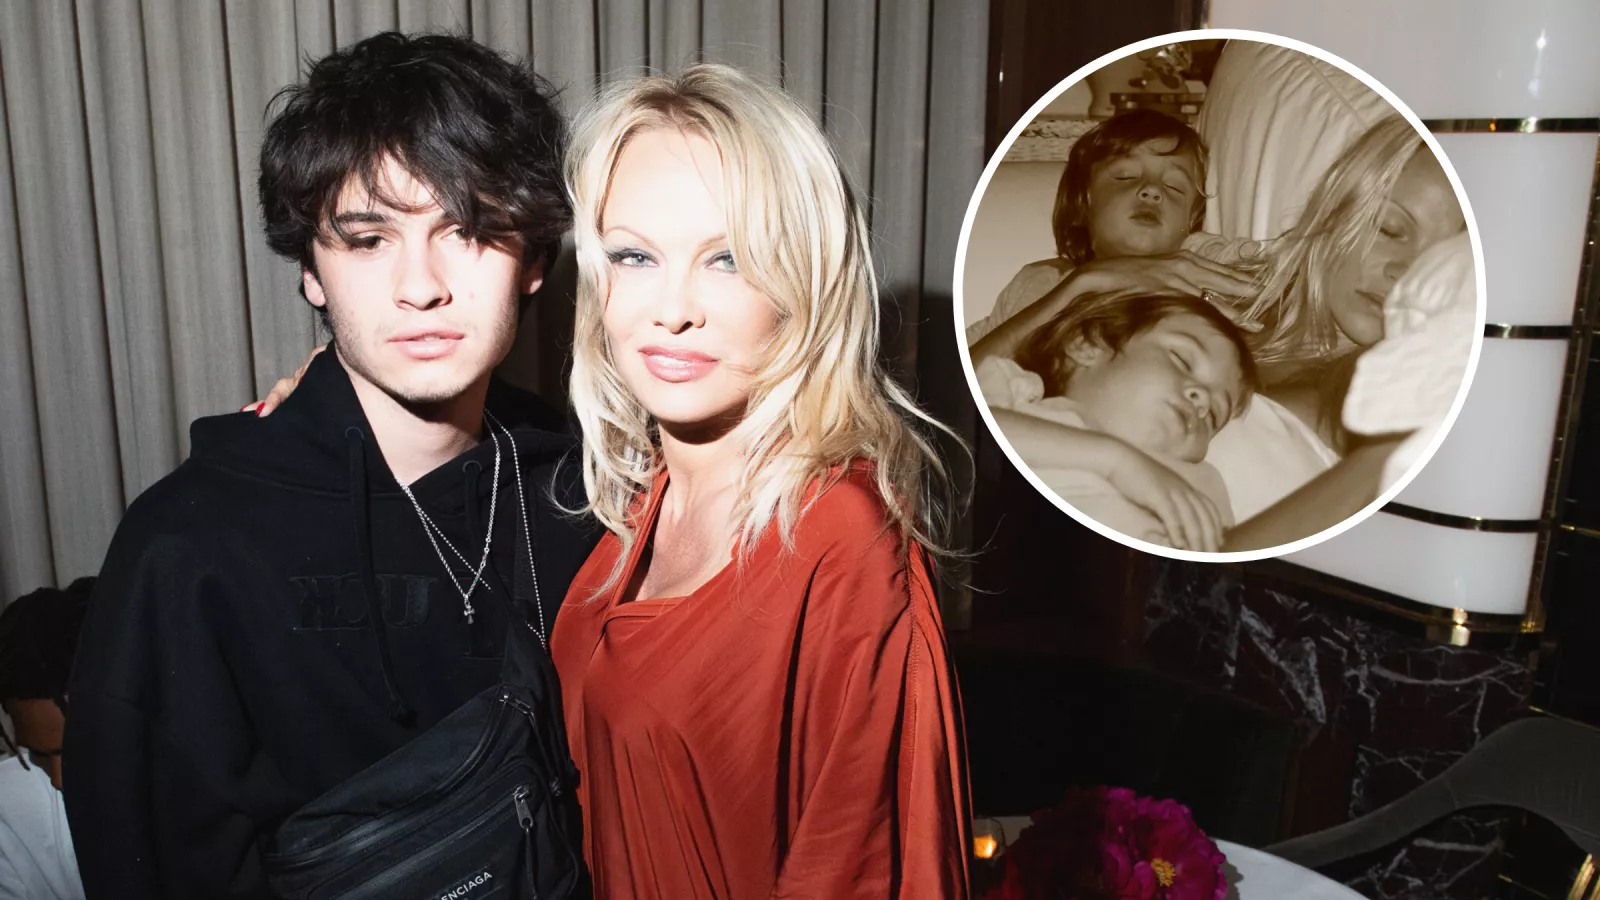 Who Is Dylan Jagger? What to Know About Pamela Anderson and Tommy Lee's Son